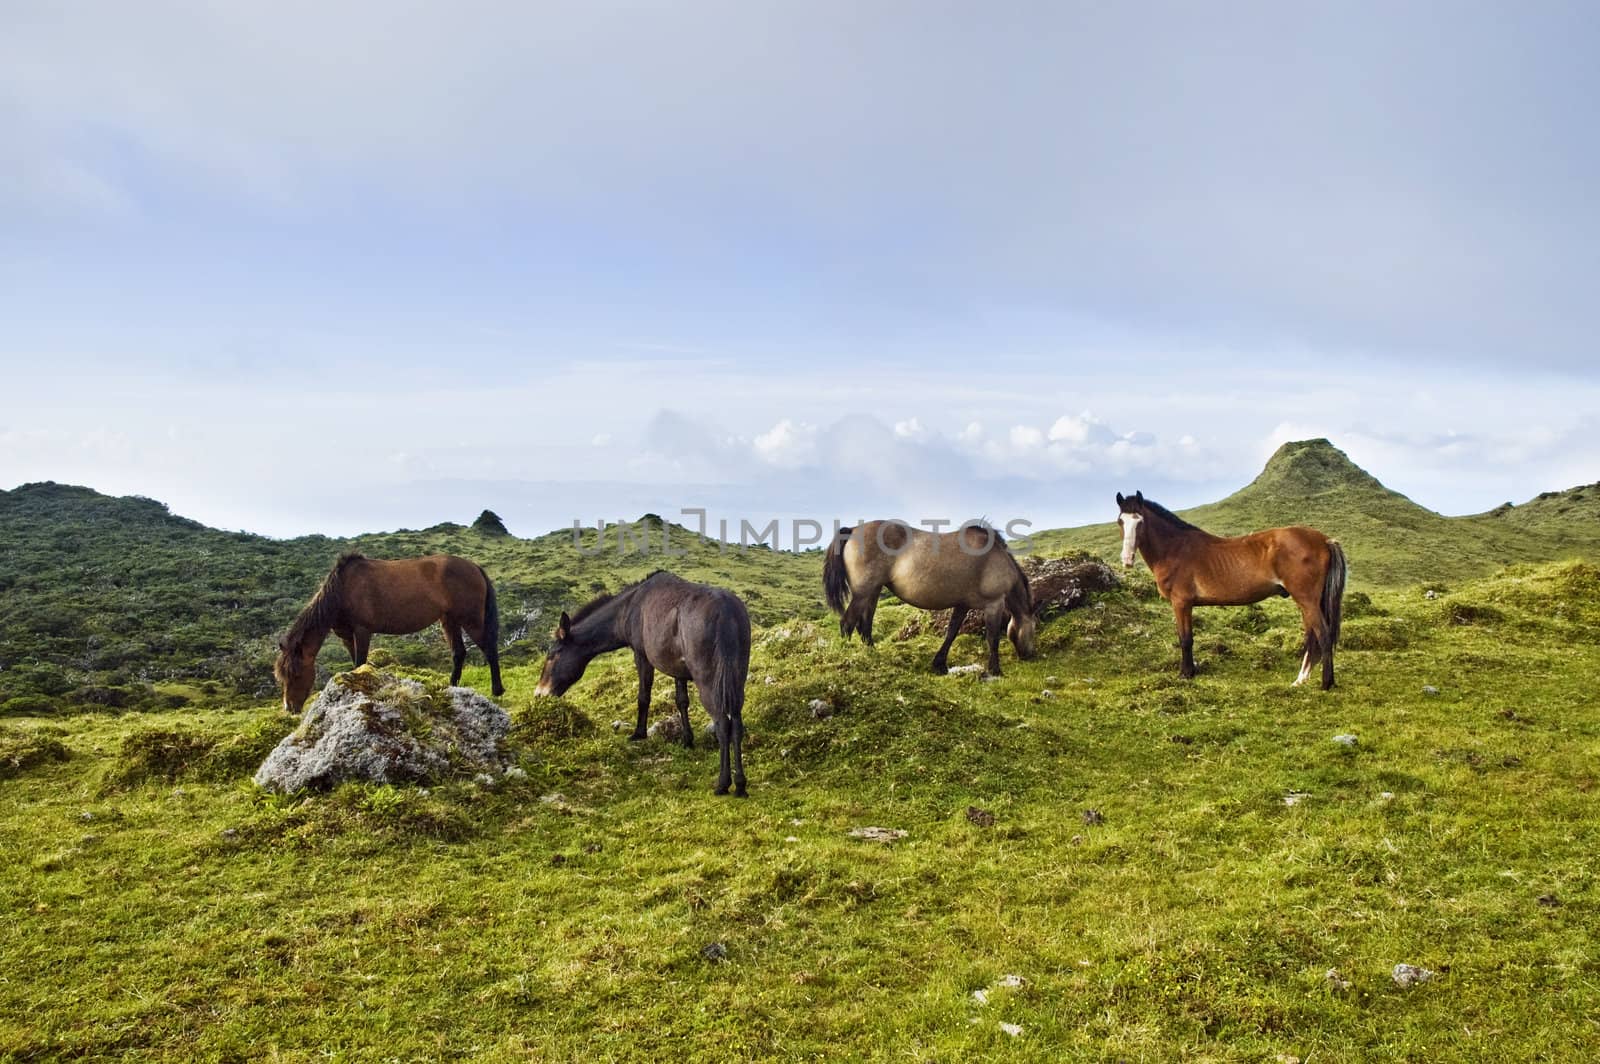 Horses grazing free in a green pasture landscape of Pico island, Azores, Portugal
